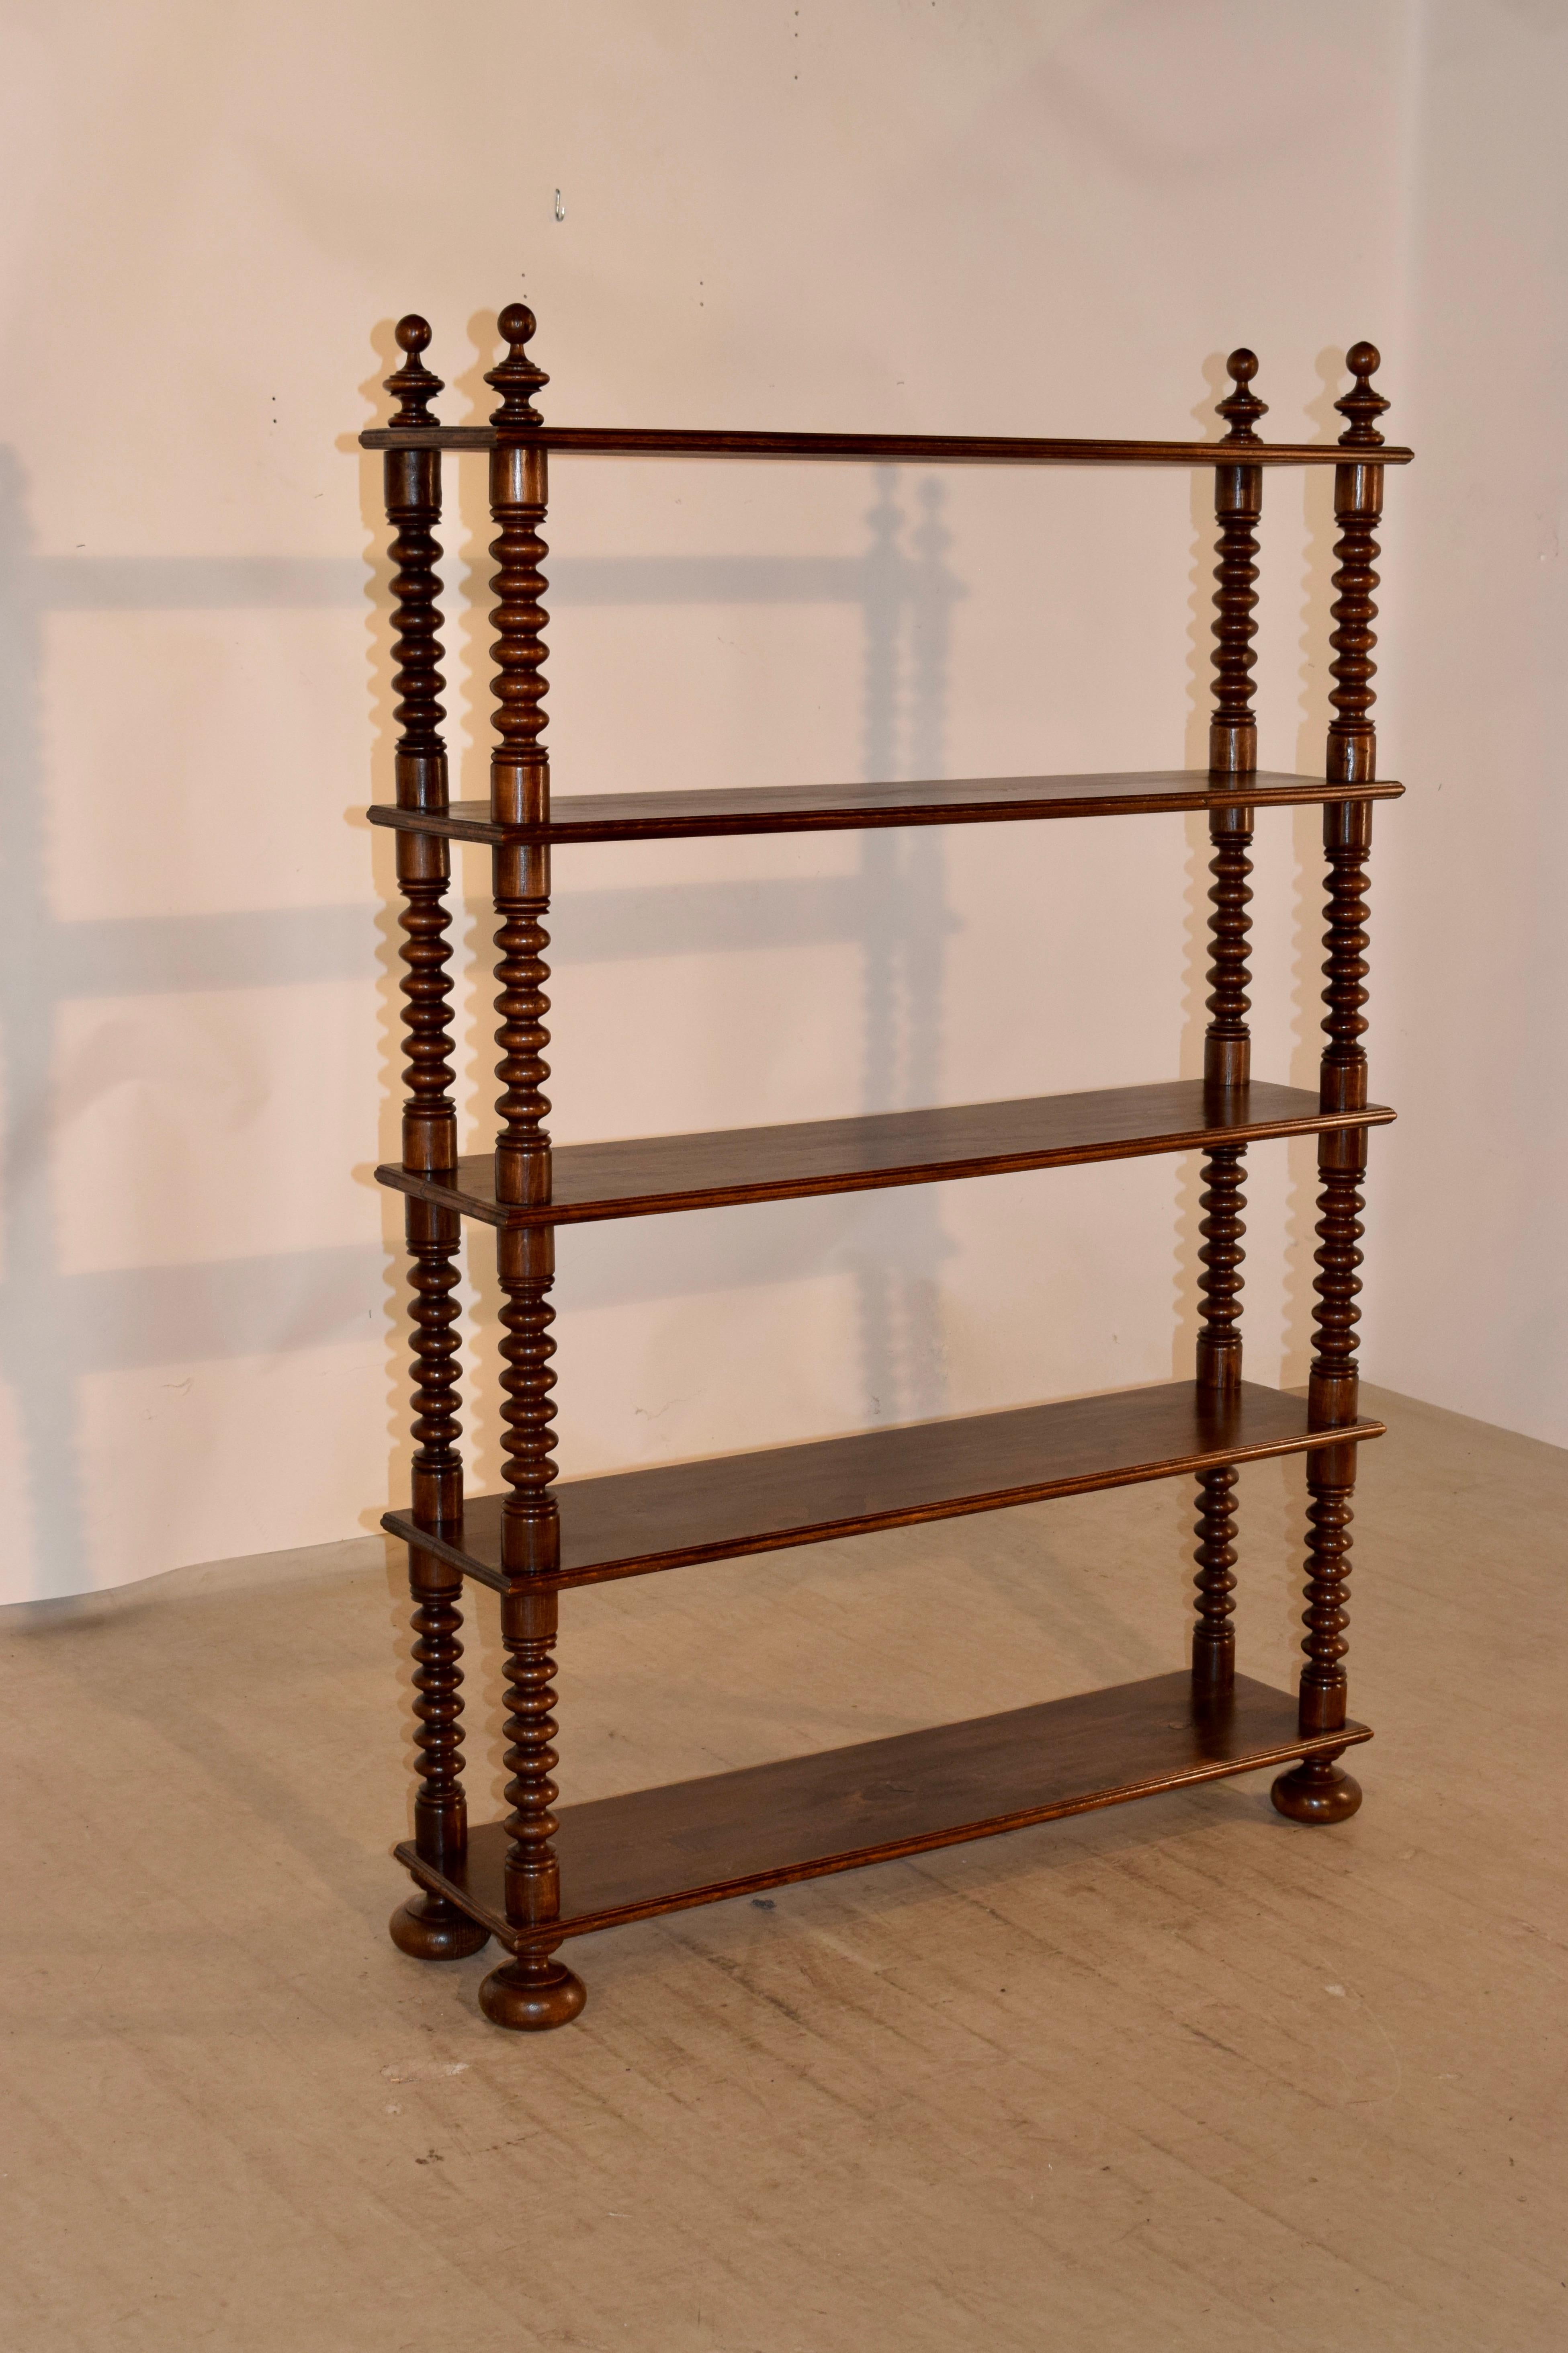 19th century French standing shelf made from walnut. It has lovely hand turned finials and shelf supports in a bobbin pattern, and is resting on lovely hand turned bun feet.